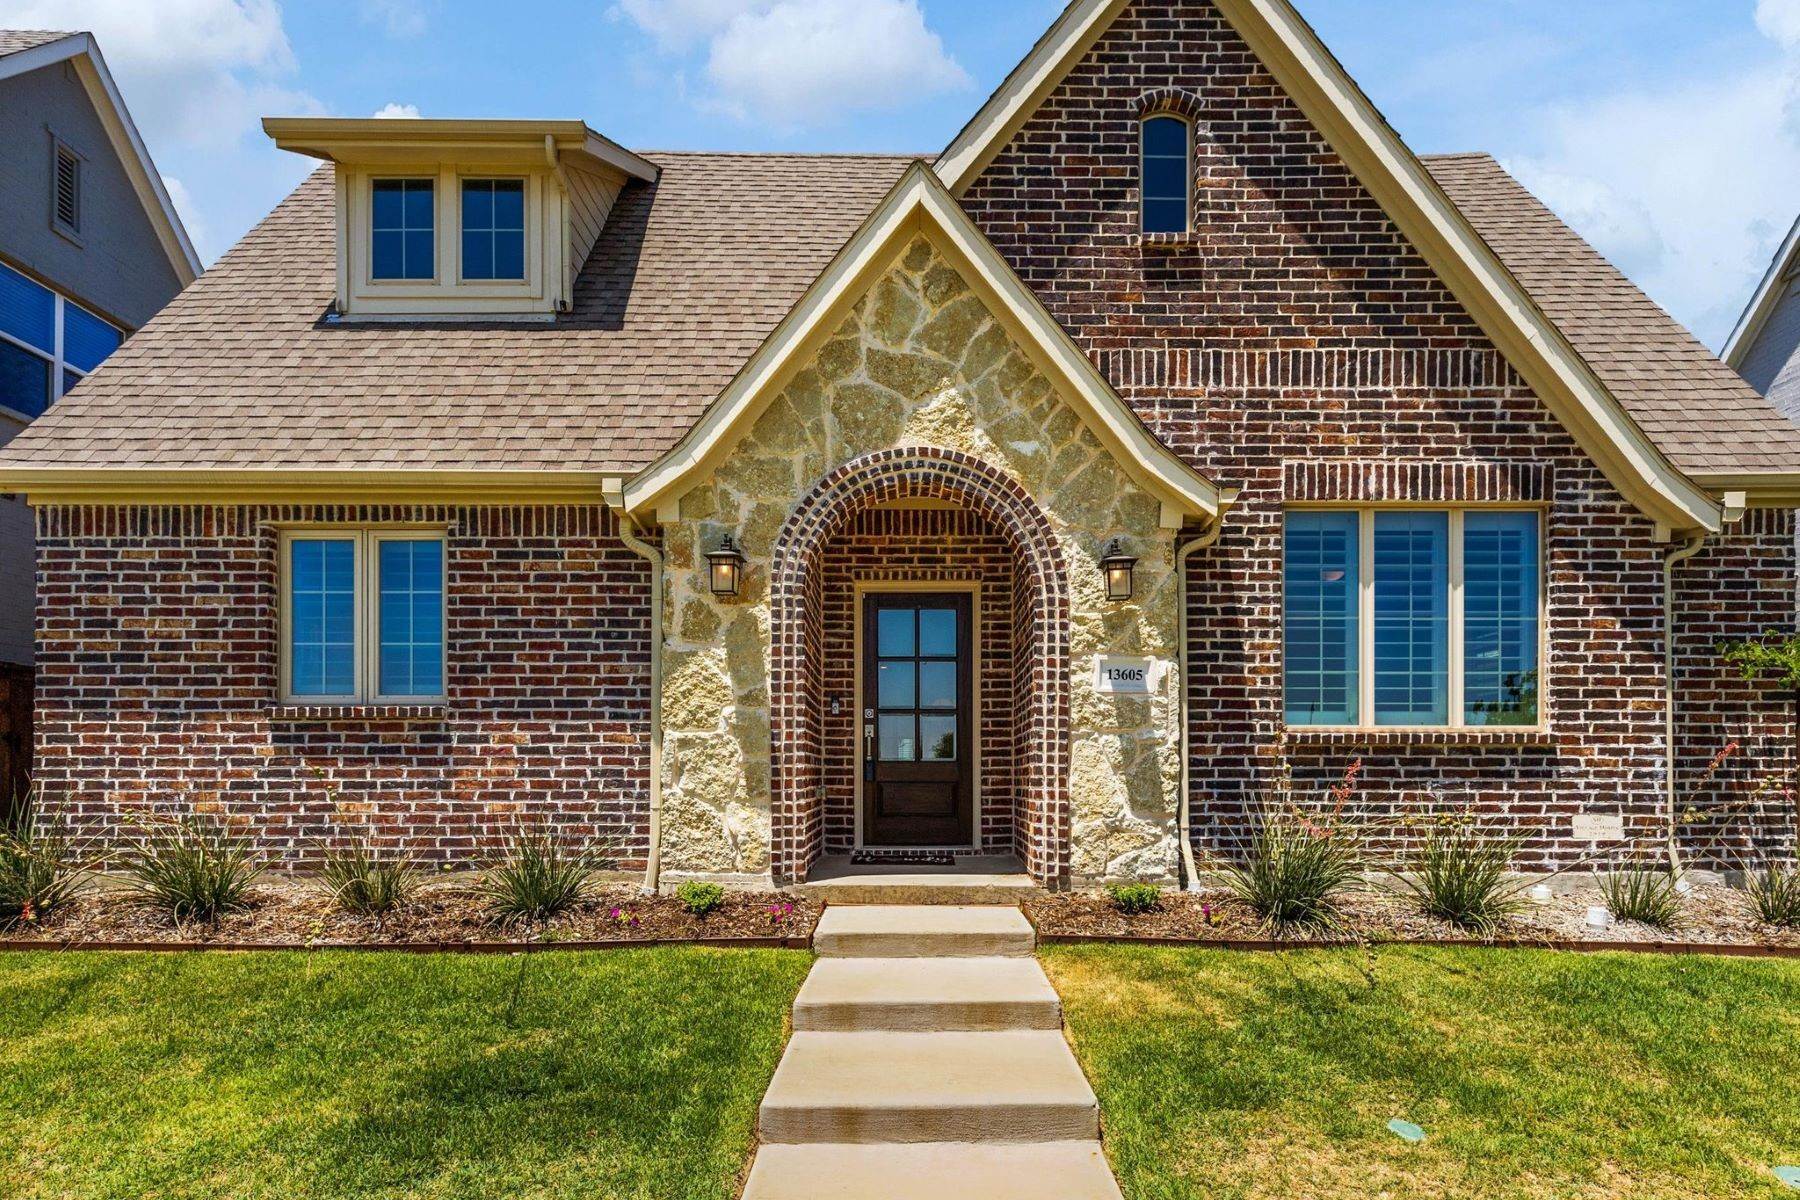 Single Family Homes for Sale at 13605 Sweetwalk Place, Aledo, TX, 76008 13605 Sweetwalk Place Aledo, Texas 76008 United States